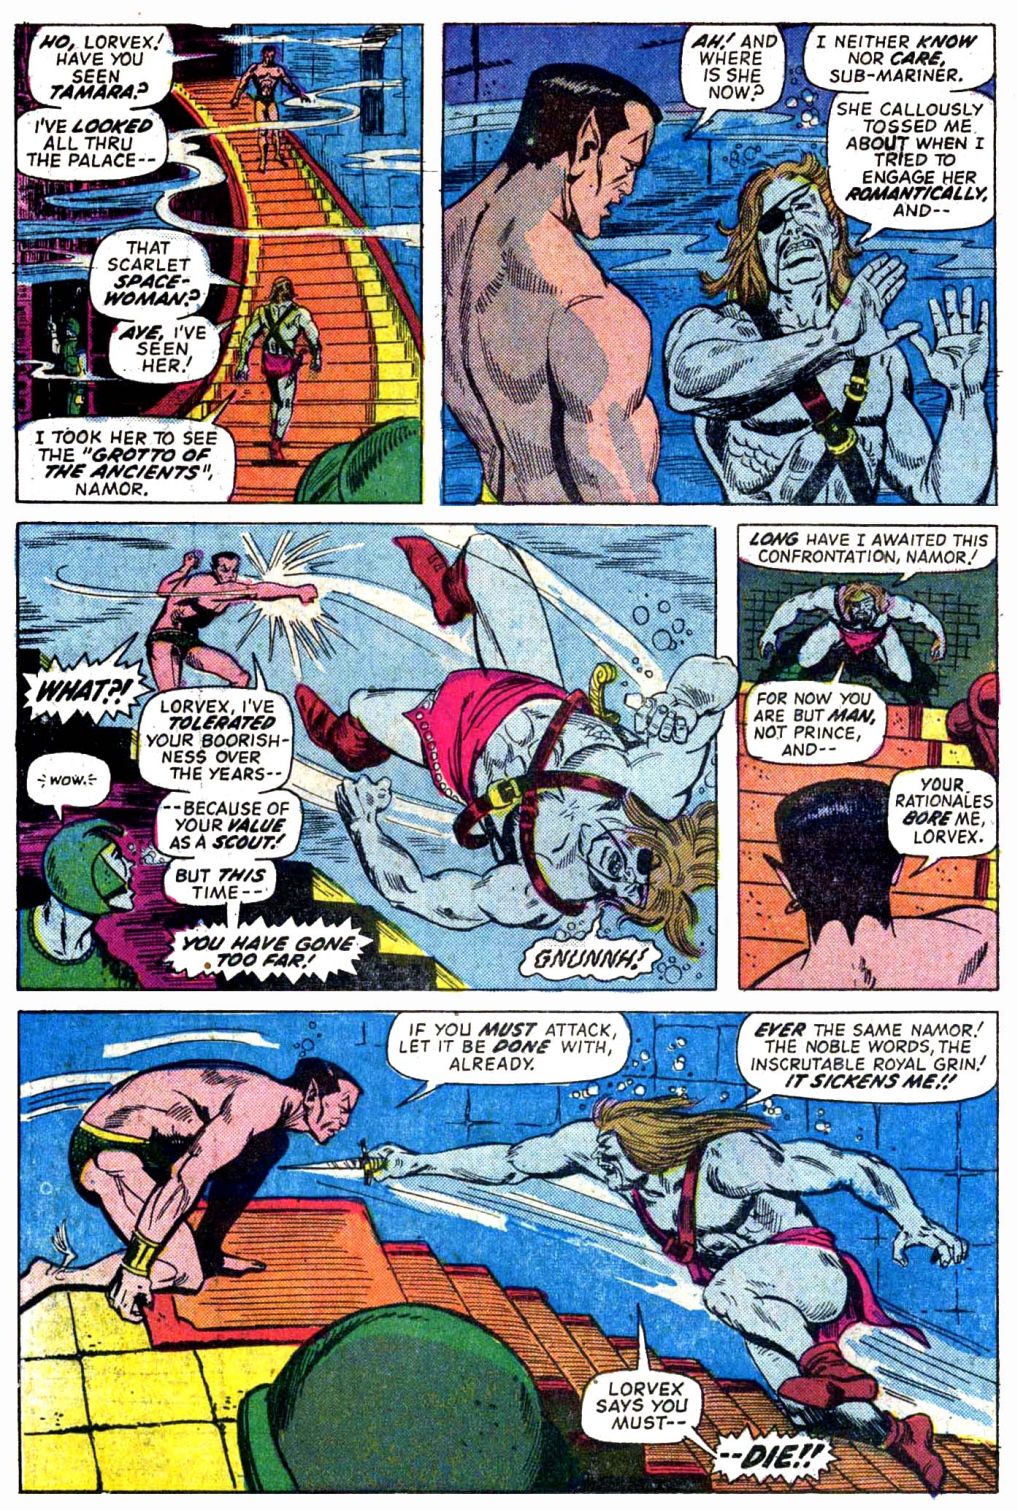 Read online The Sub-Mariner comic -  Issue #59 - 14